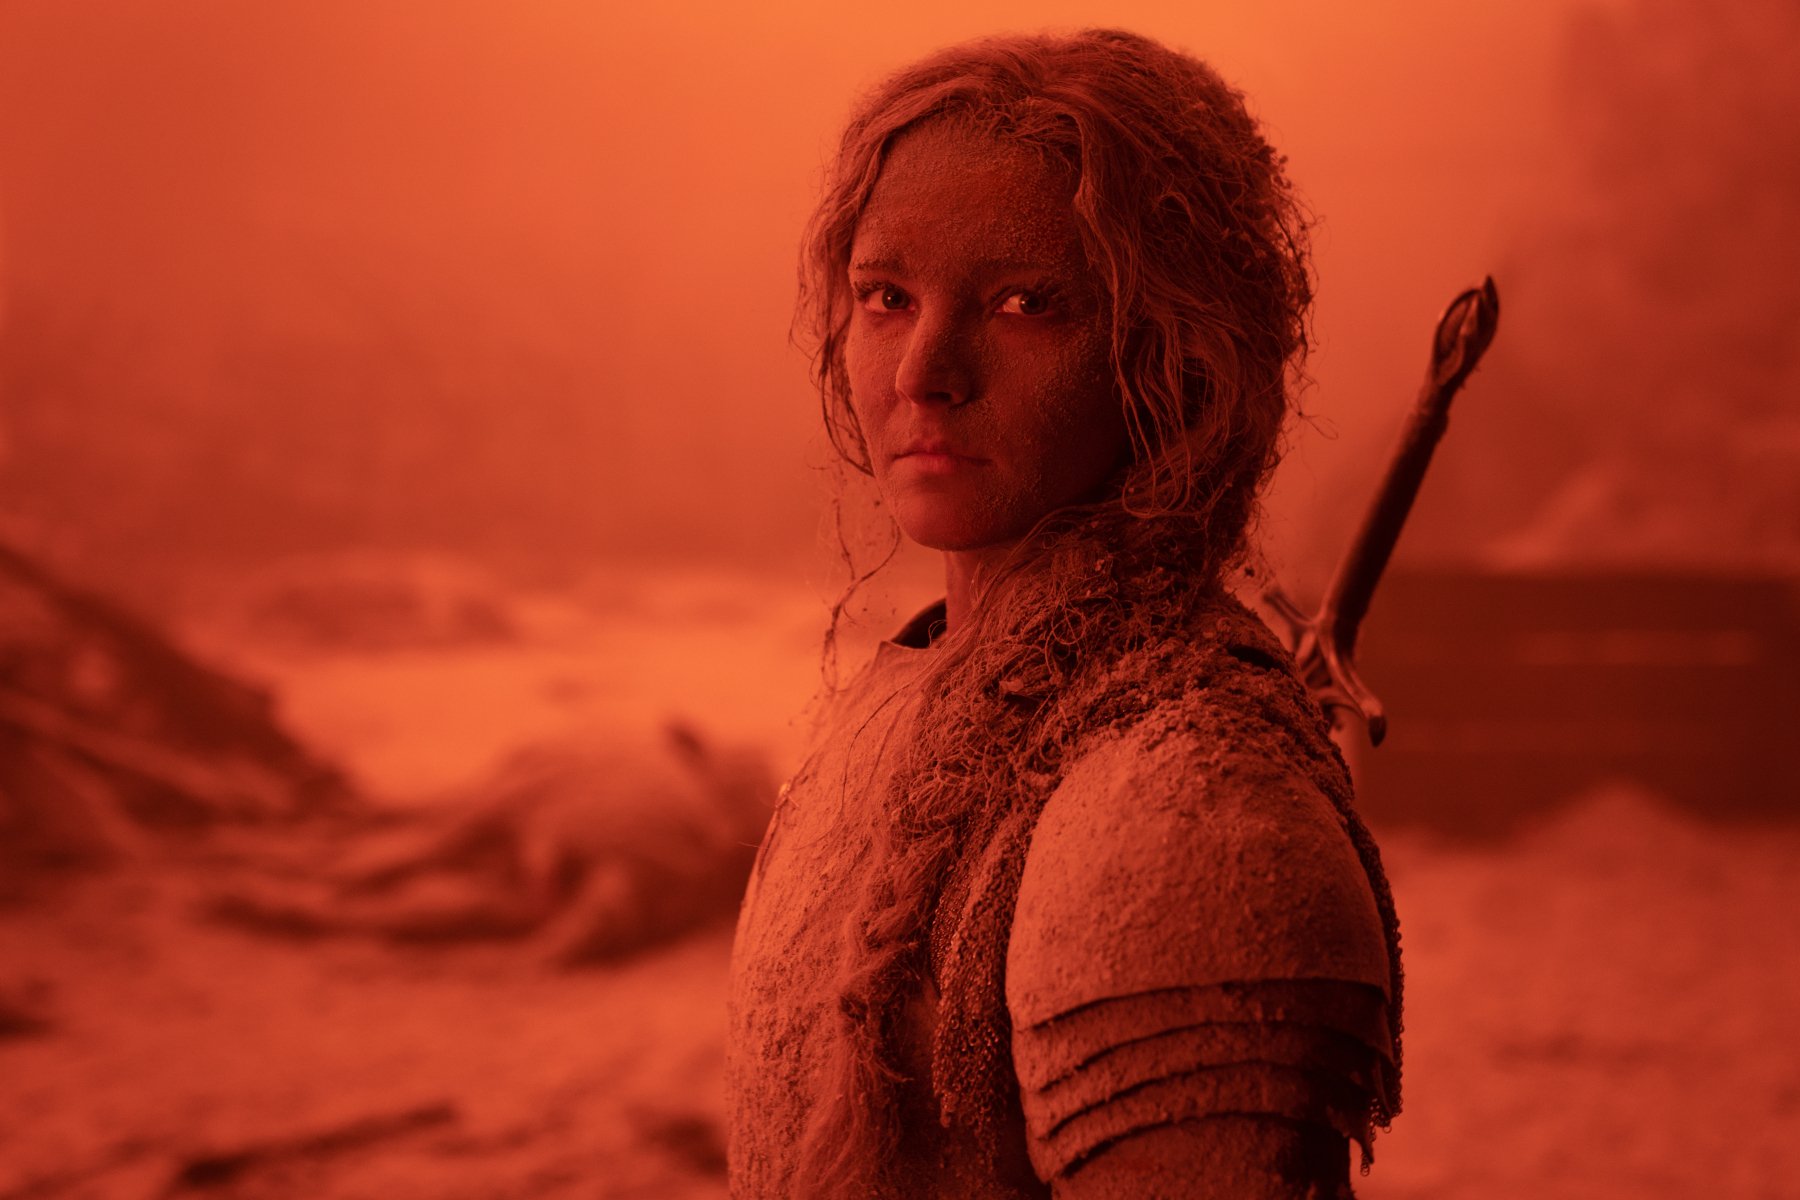 Morfydd Clark as Galadriel in 'The Rings of Power' Episode 7. She's standing in the destruction of the Southlands, everything is red, and she seems to be covered in ash.